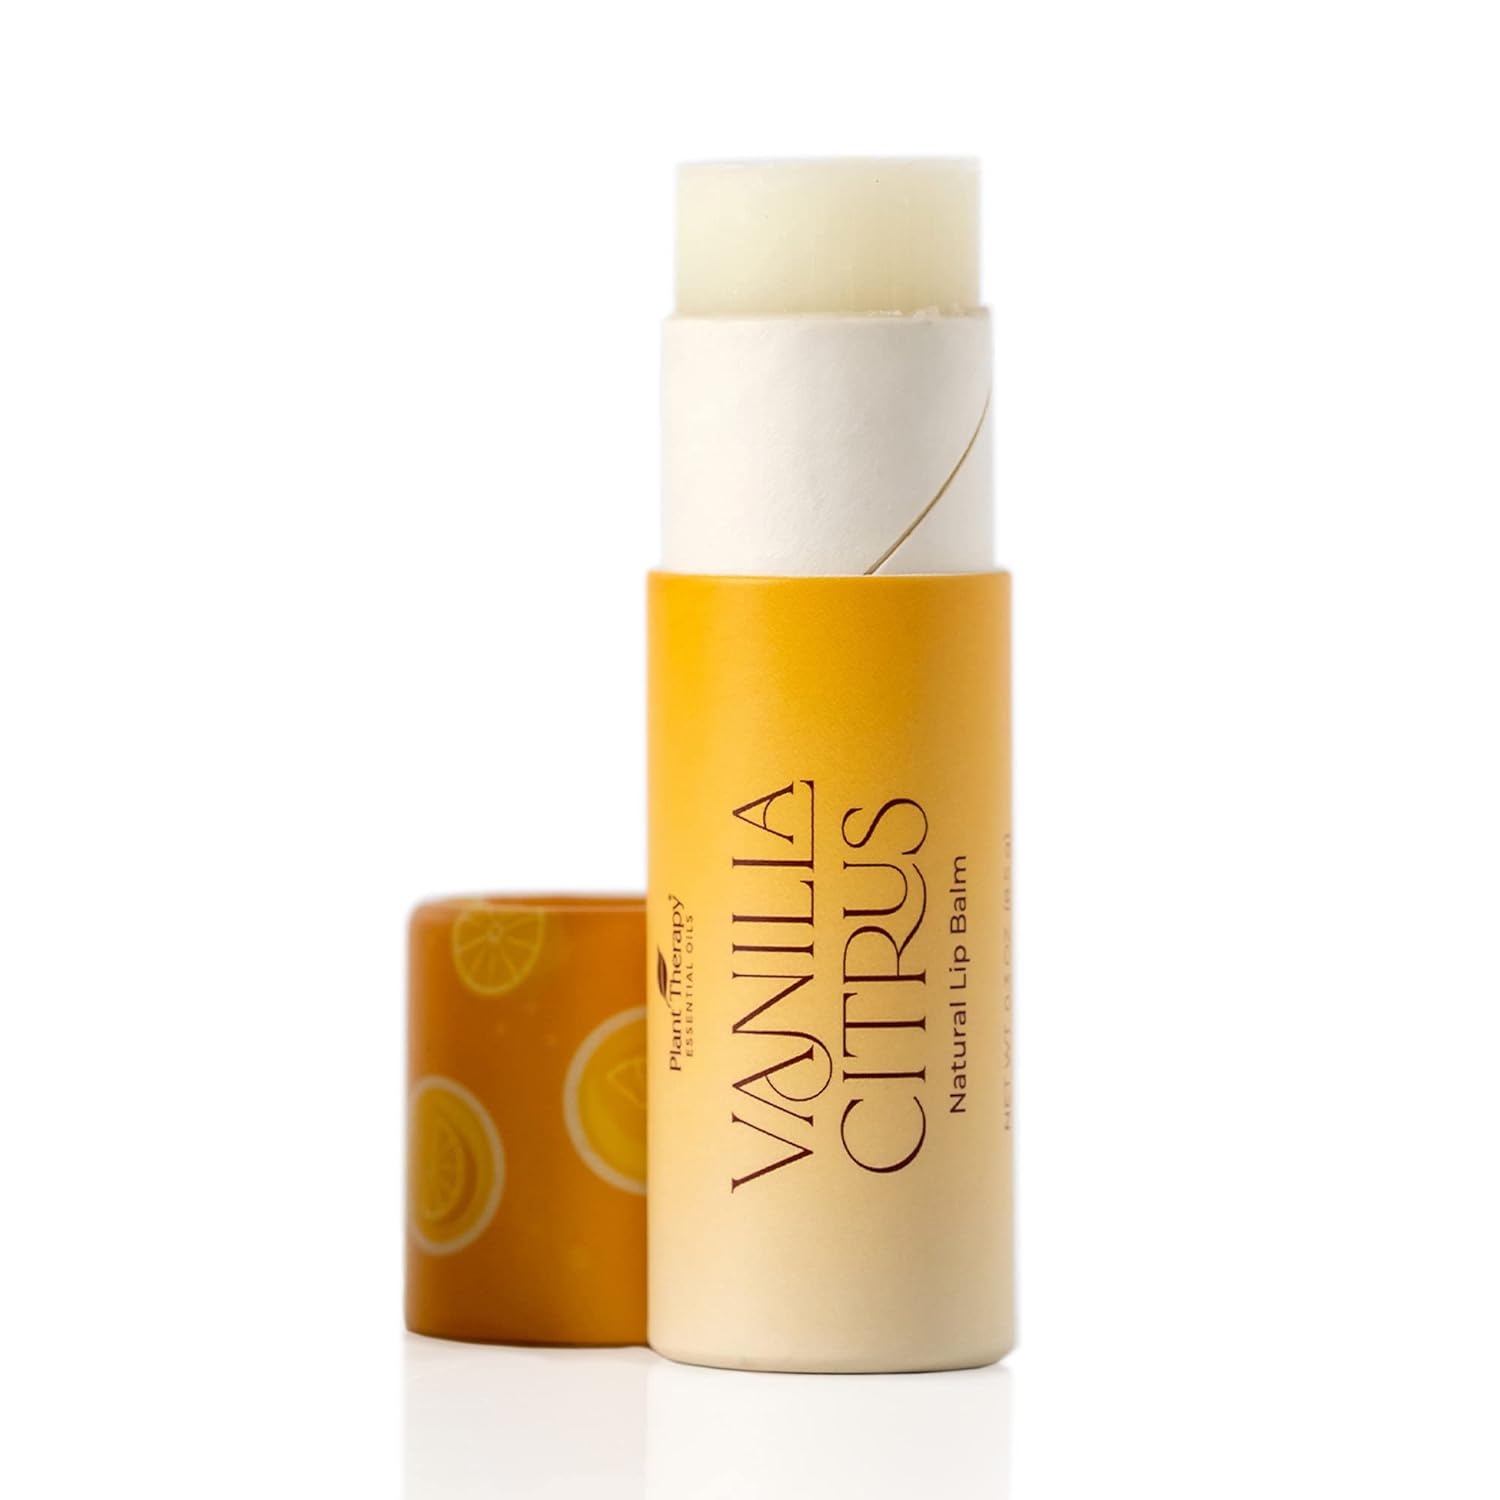 Plant Therapy Vanilla Citrus Natural Lip Balm 0.3 oz (8.5 g) Simple, Natural Ingredients & Packaged in Eco-Friendly Recyclable Cardboard